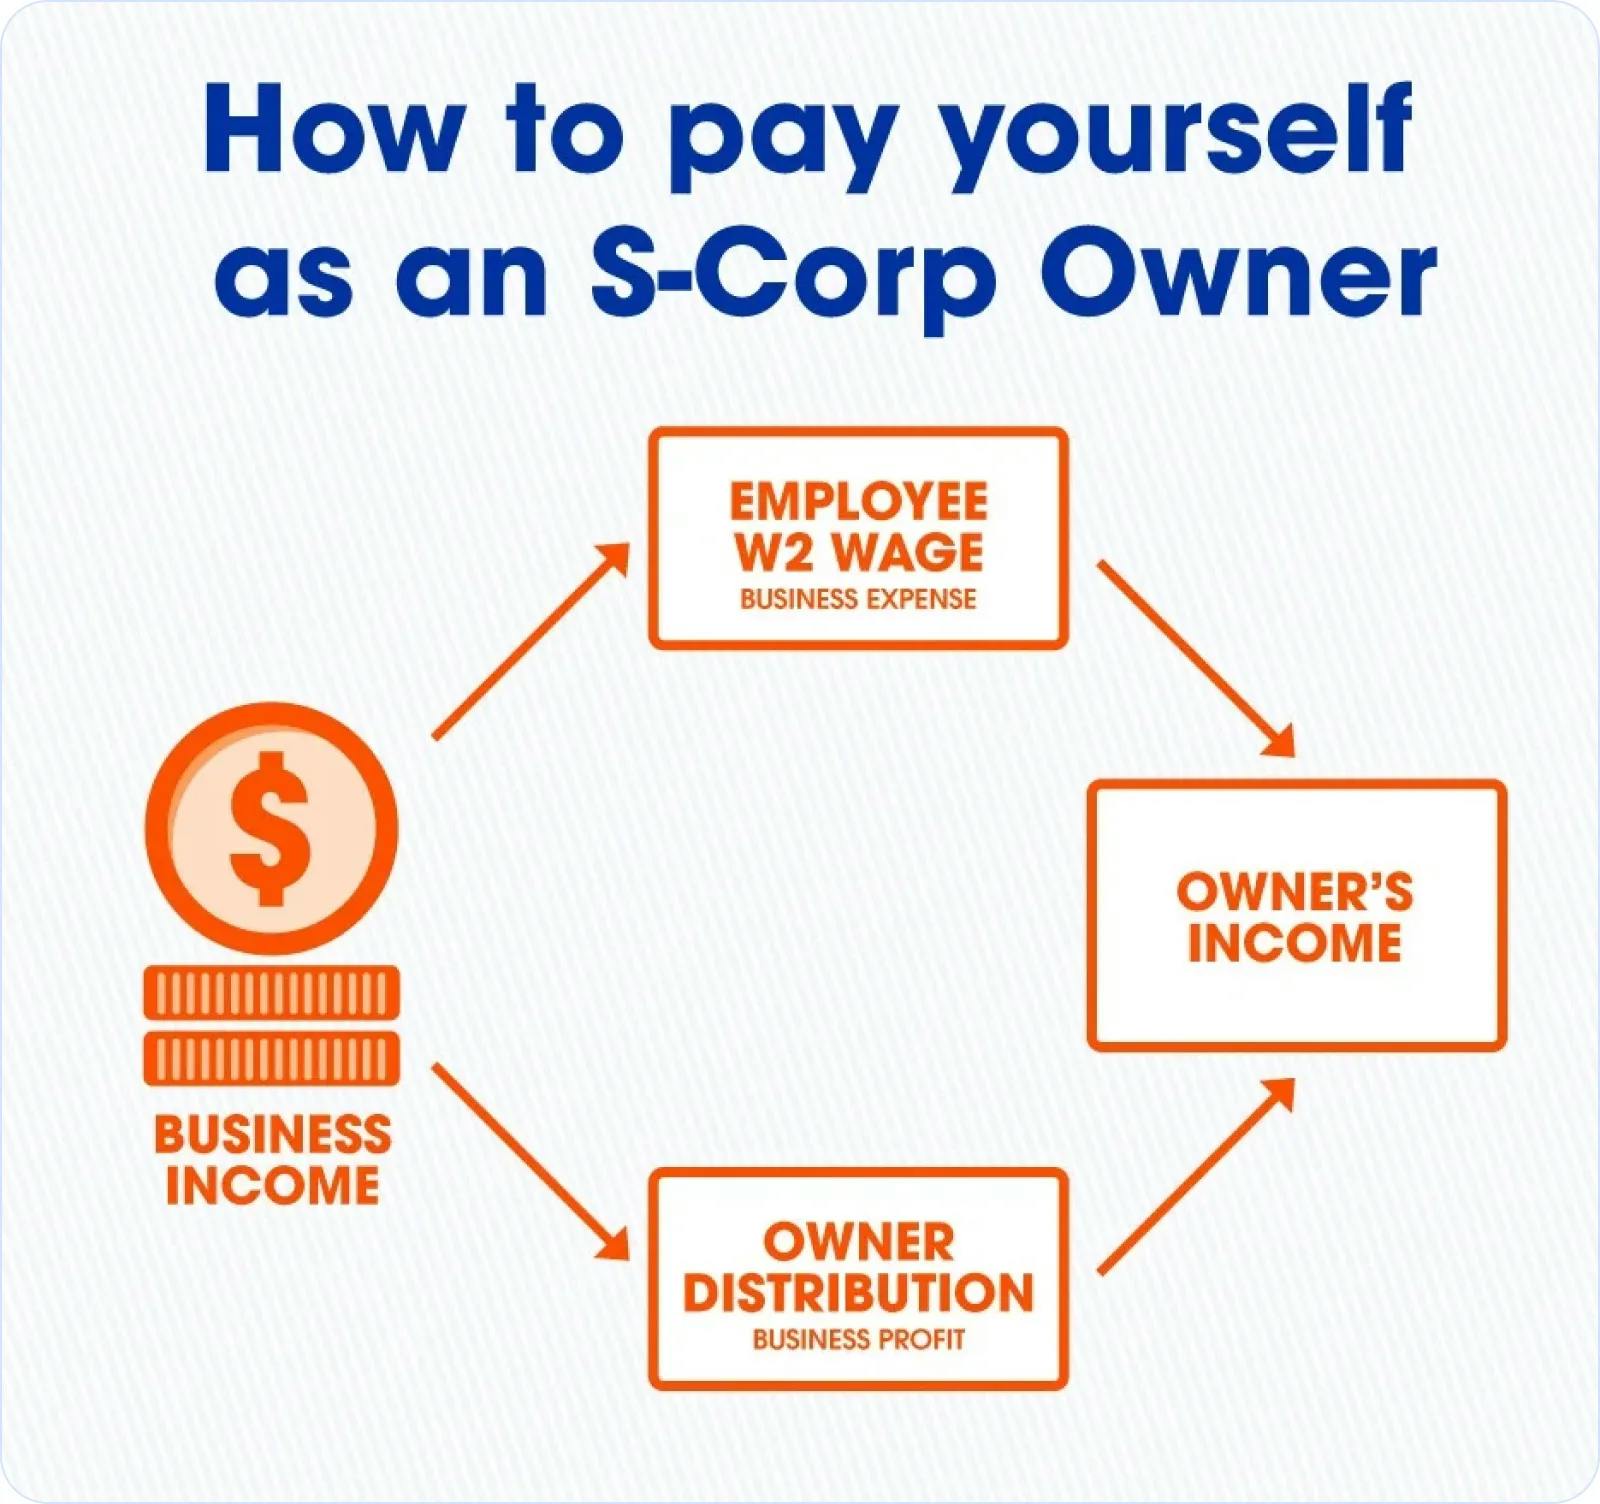 How to pay yourself as an S-Corp owner